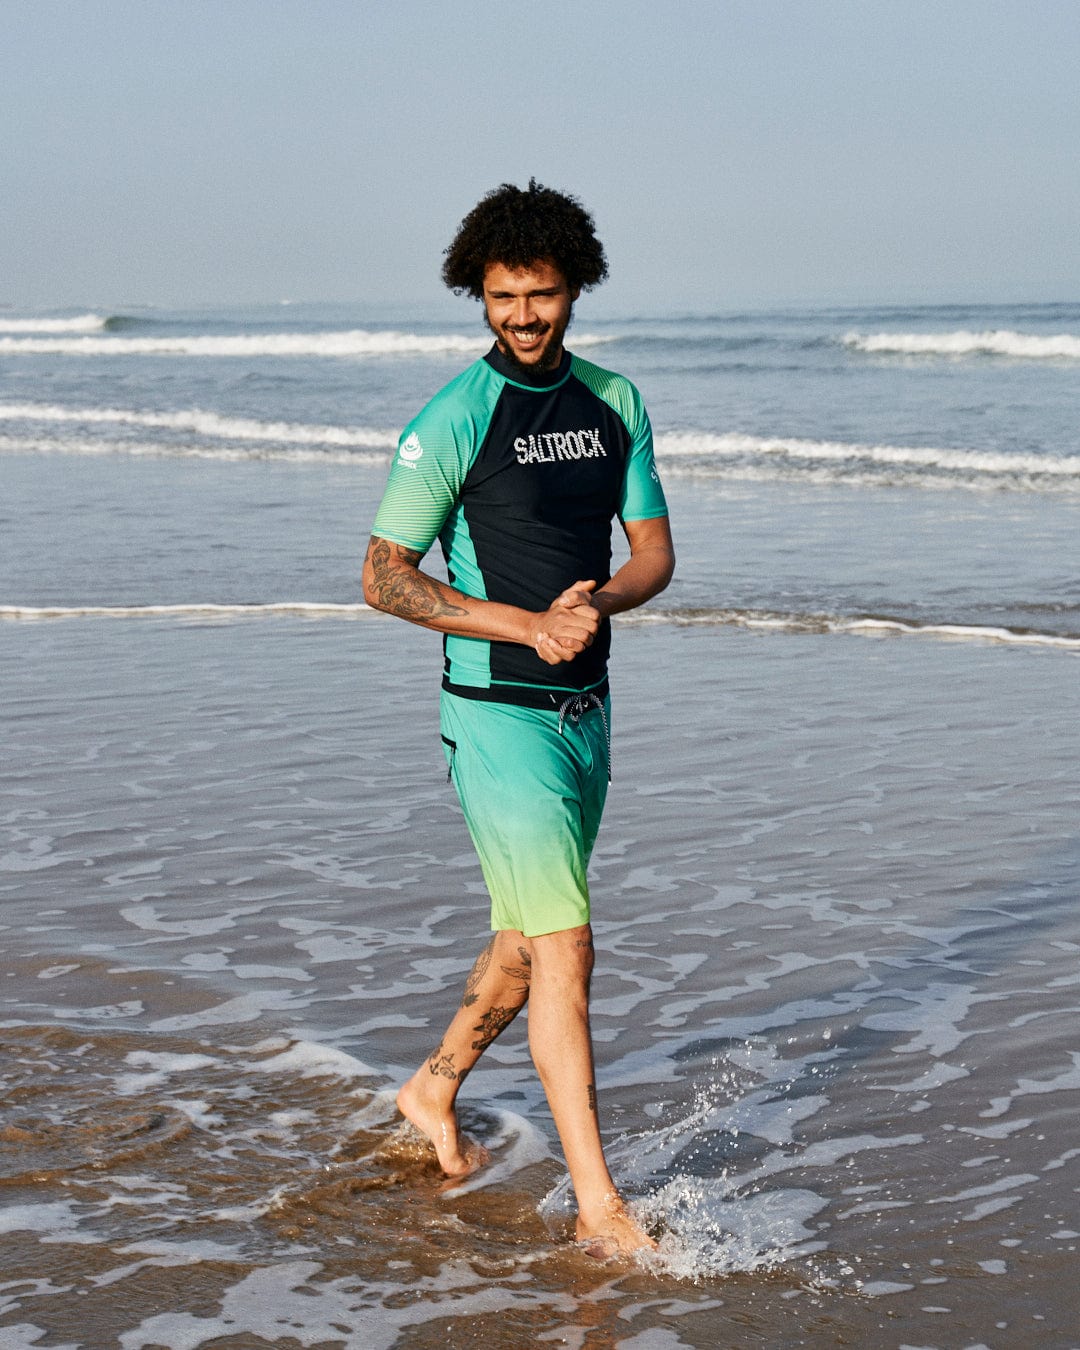 A man with curly hair in a wetsuit top and Saltrock Geo Palms Mens Boardshorts in Green, featuring an ombre palm print, running joyfully on a sandy beach with small waves breaking around his feet.